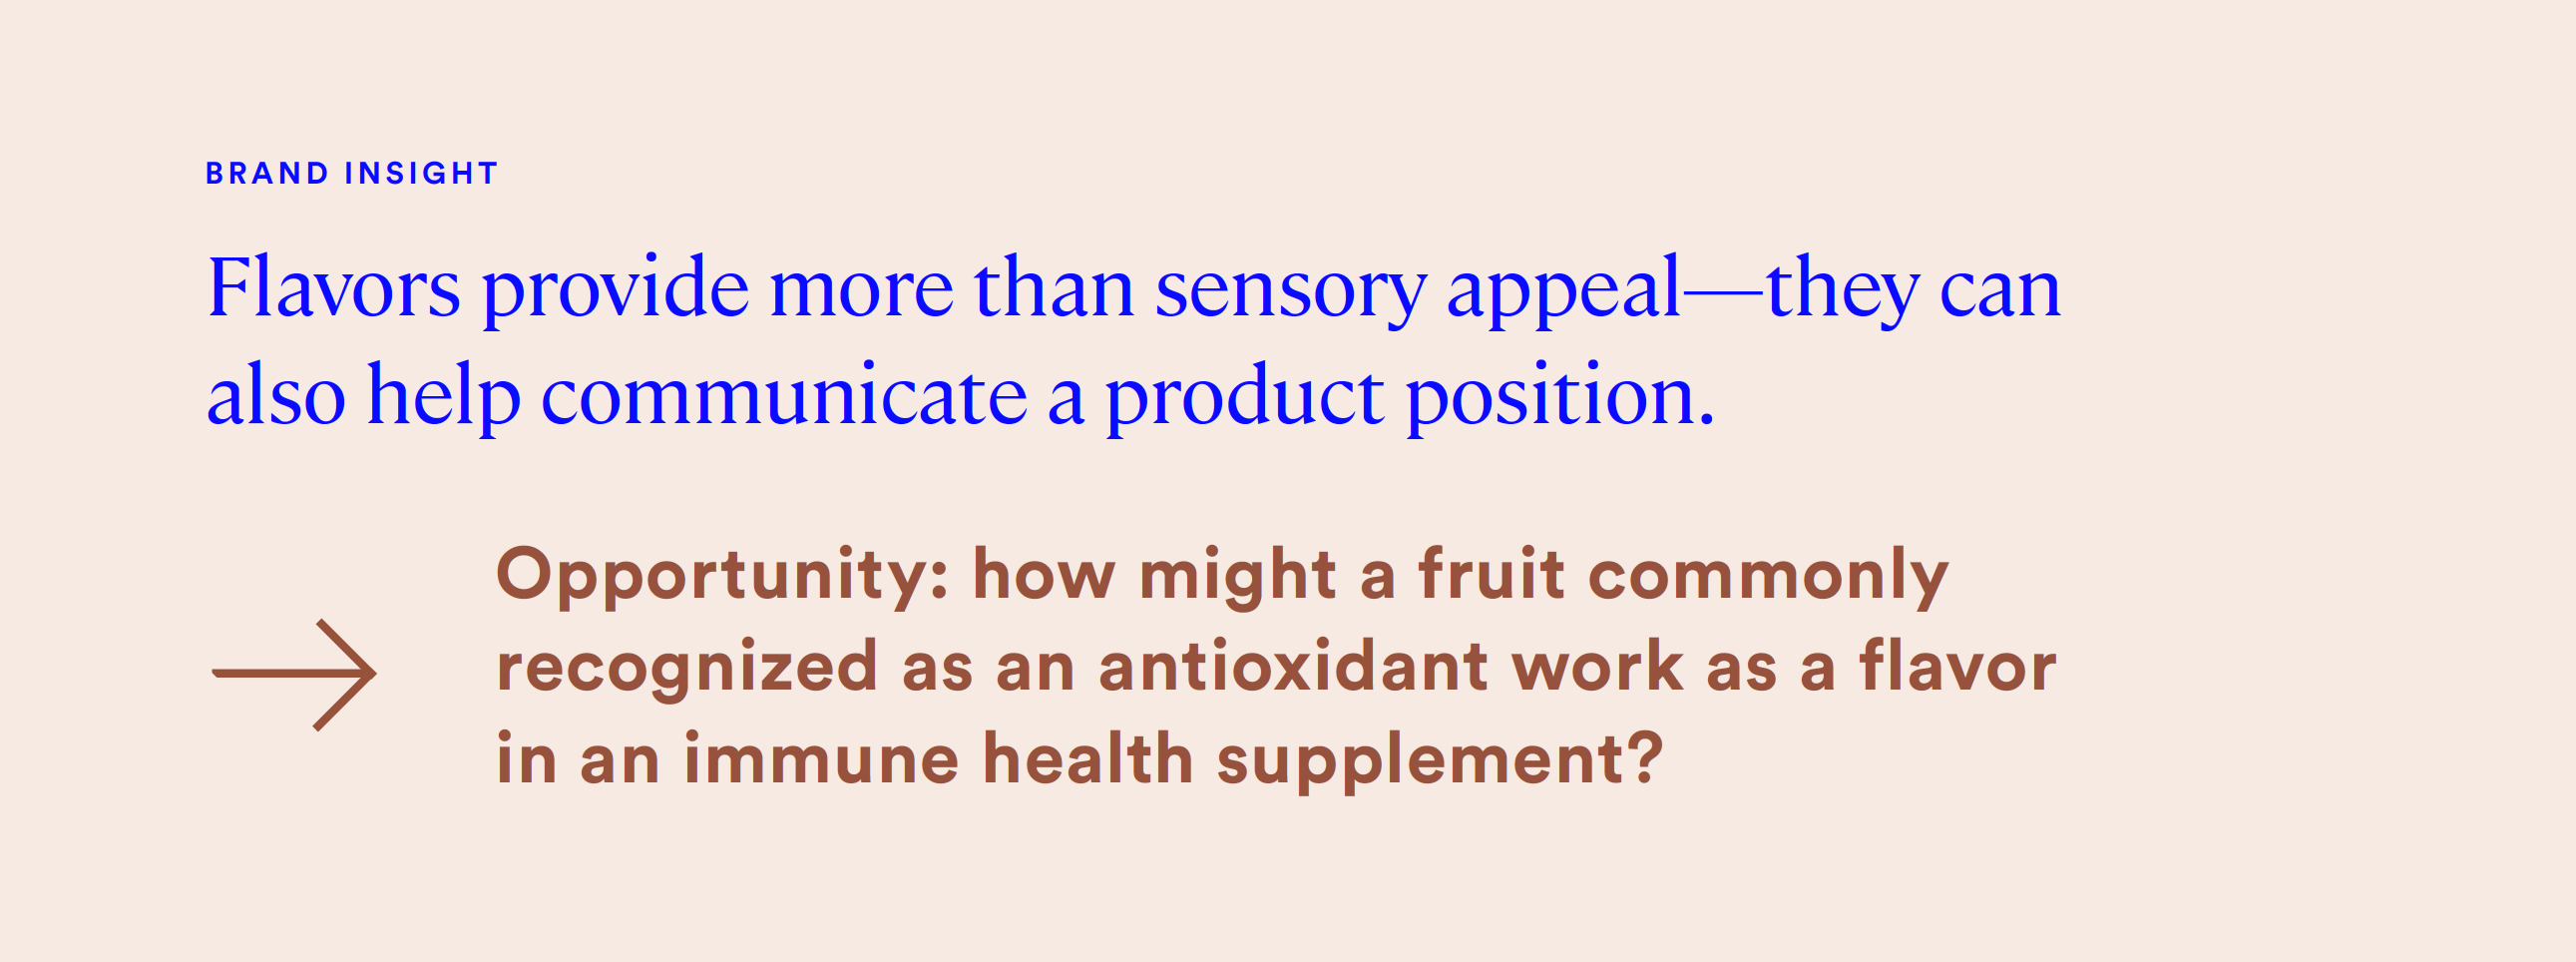 flavors provide more than sensory appeal - they can also help communicate a product position.